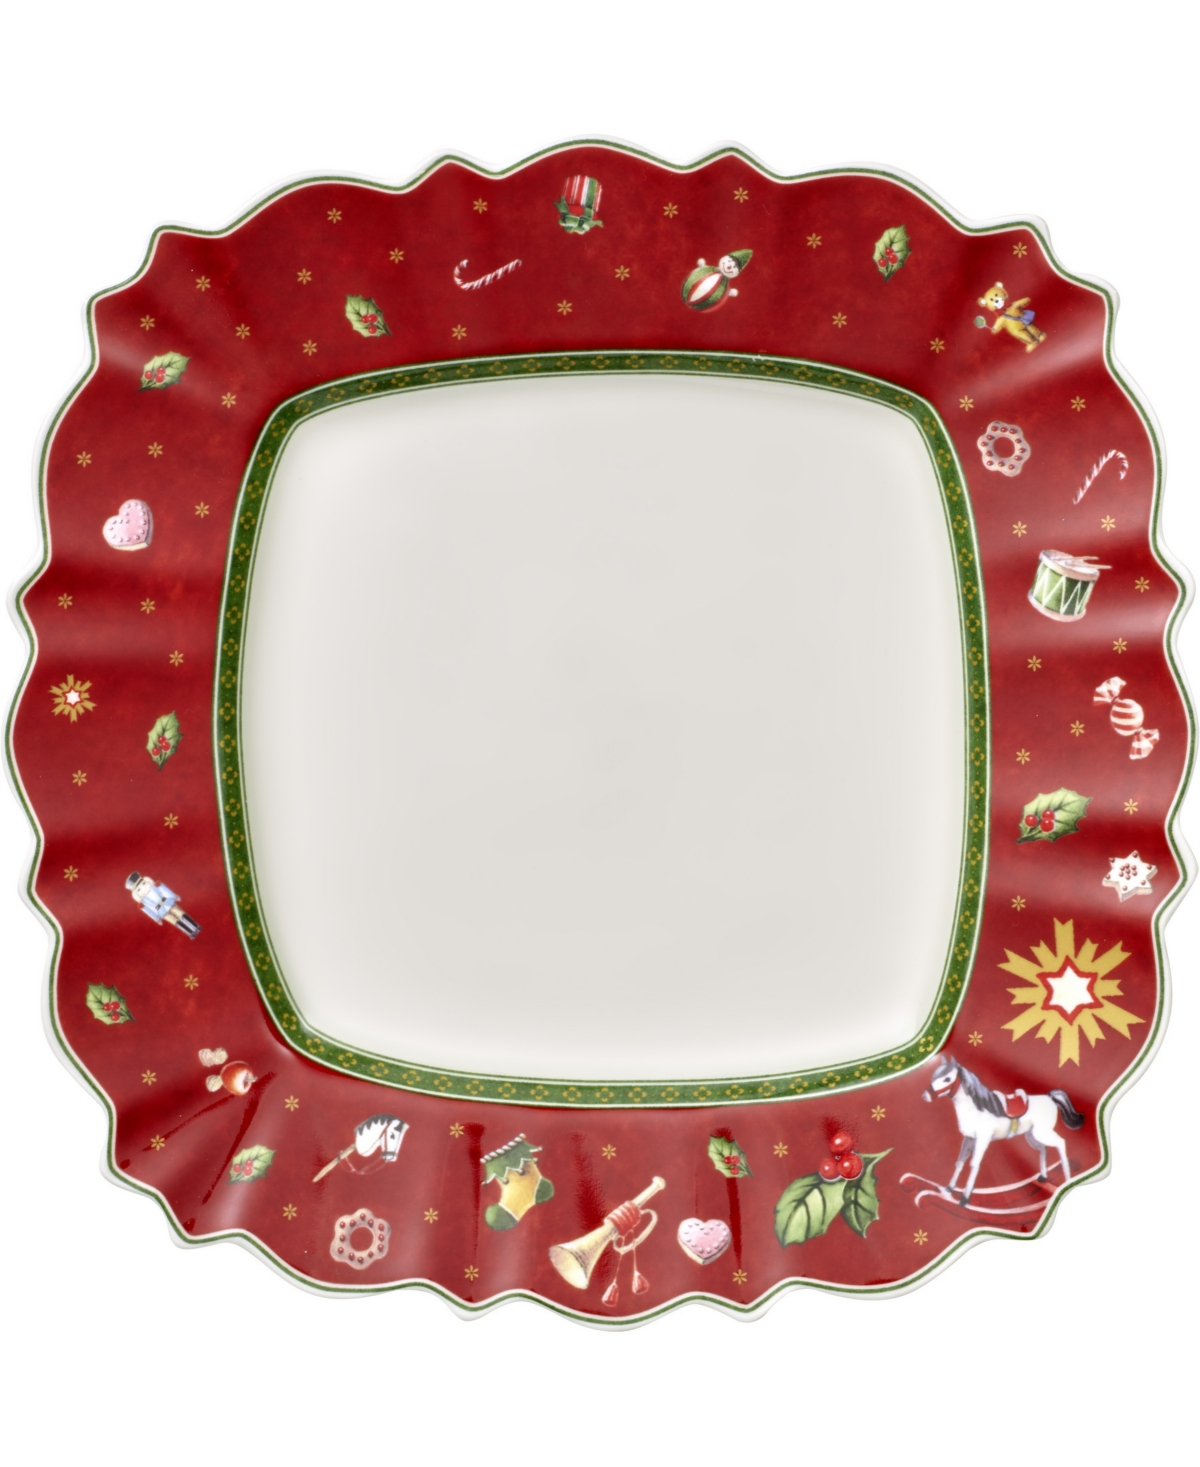 Toy's Delight Square Dinner Plate - Multi